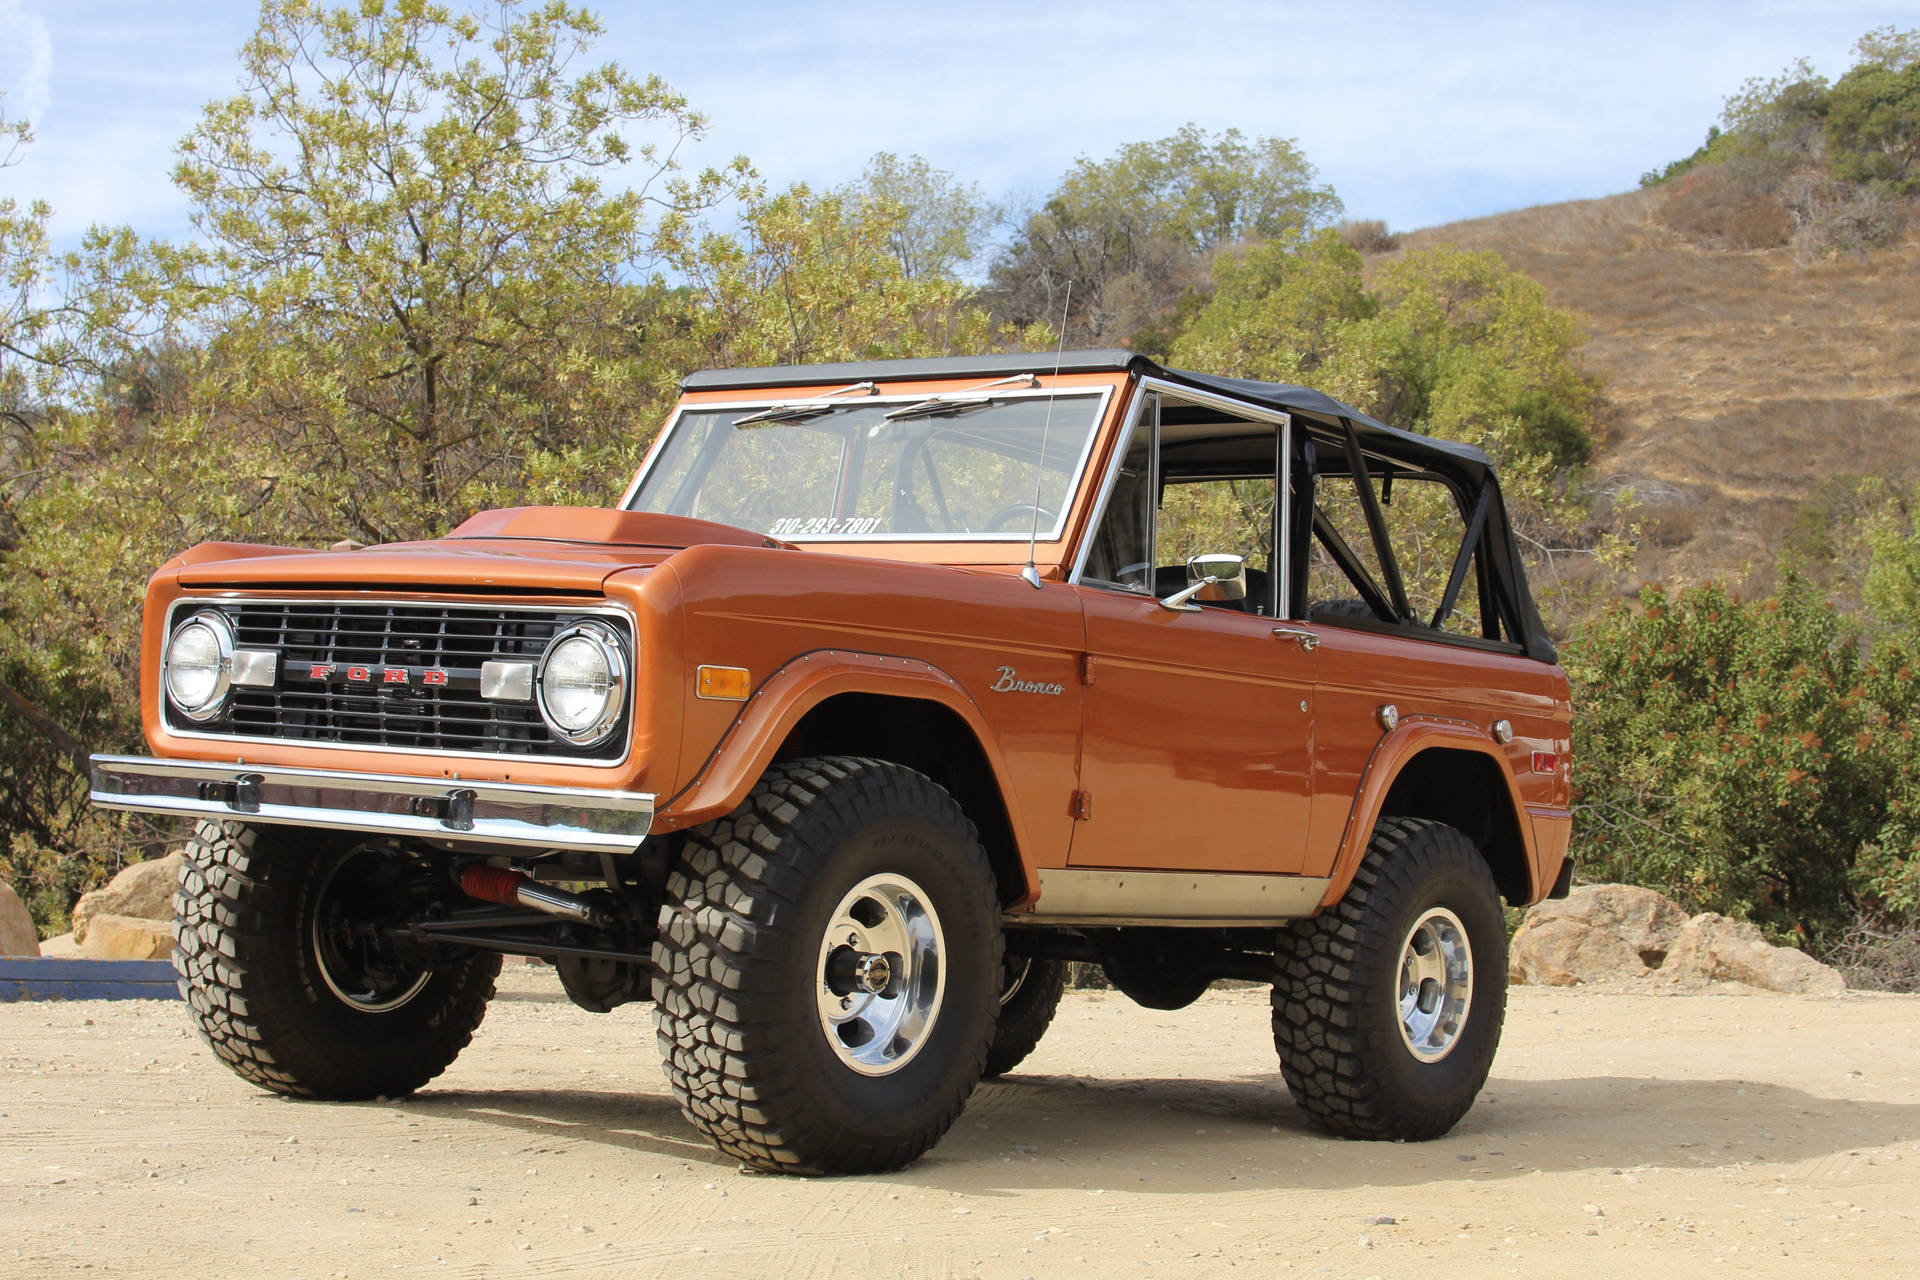 Ford Bronco Parked In Dirt Road